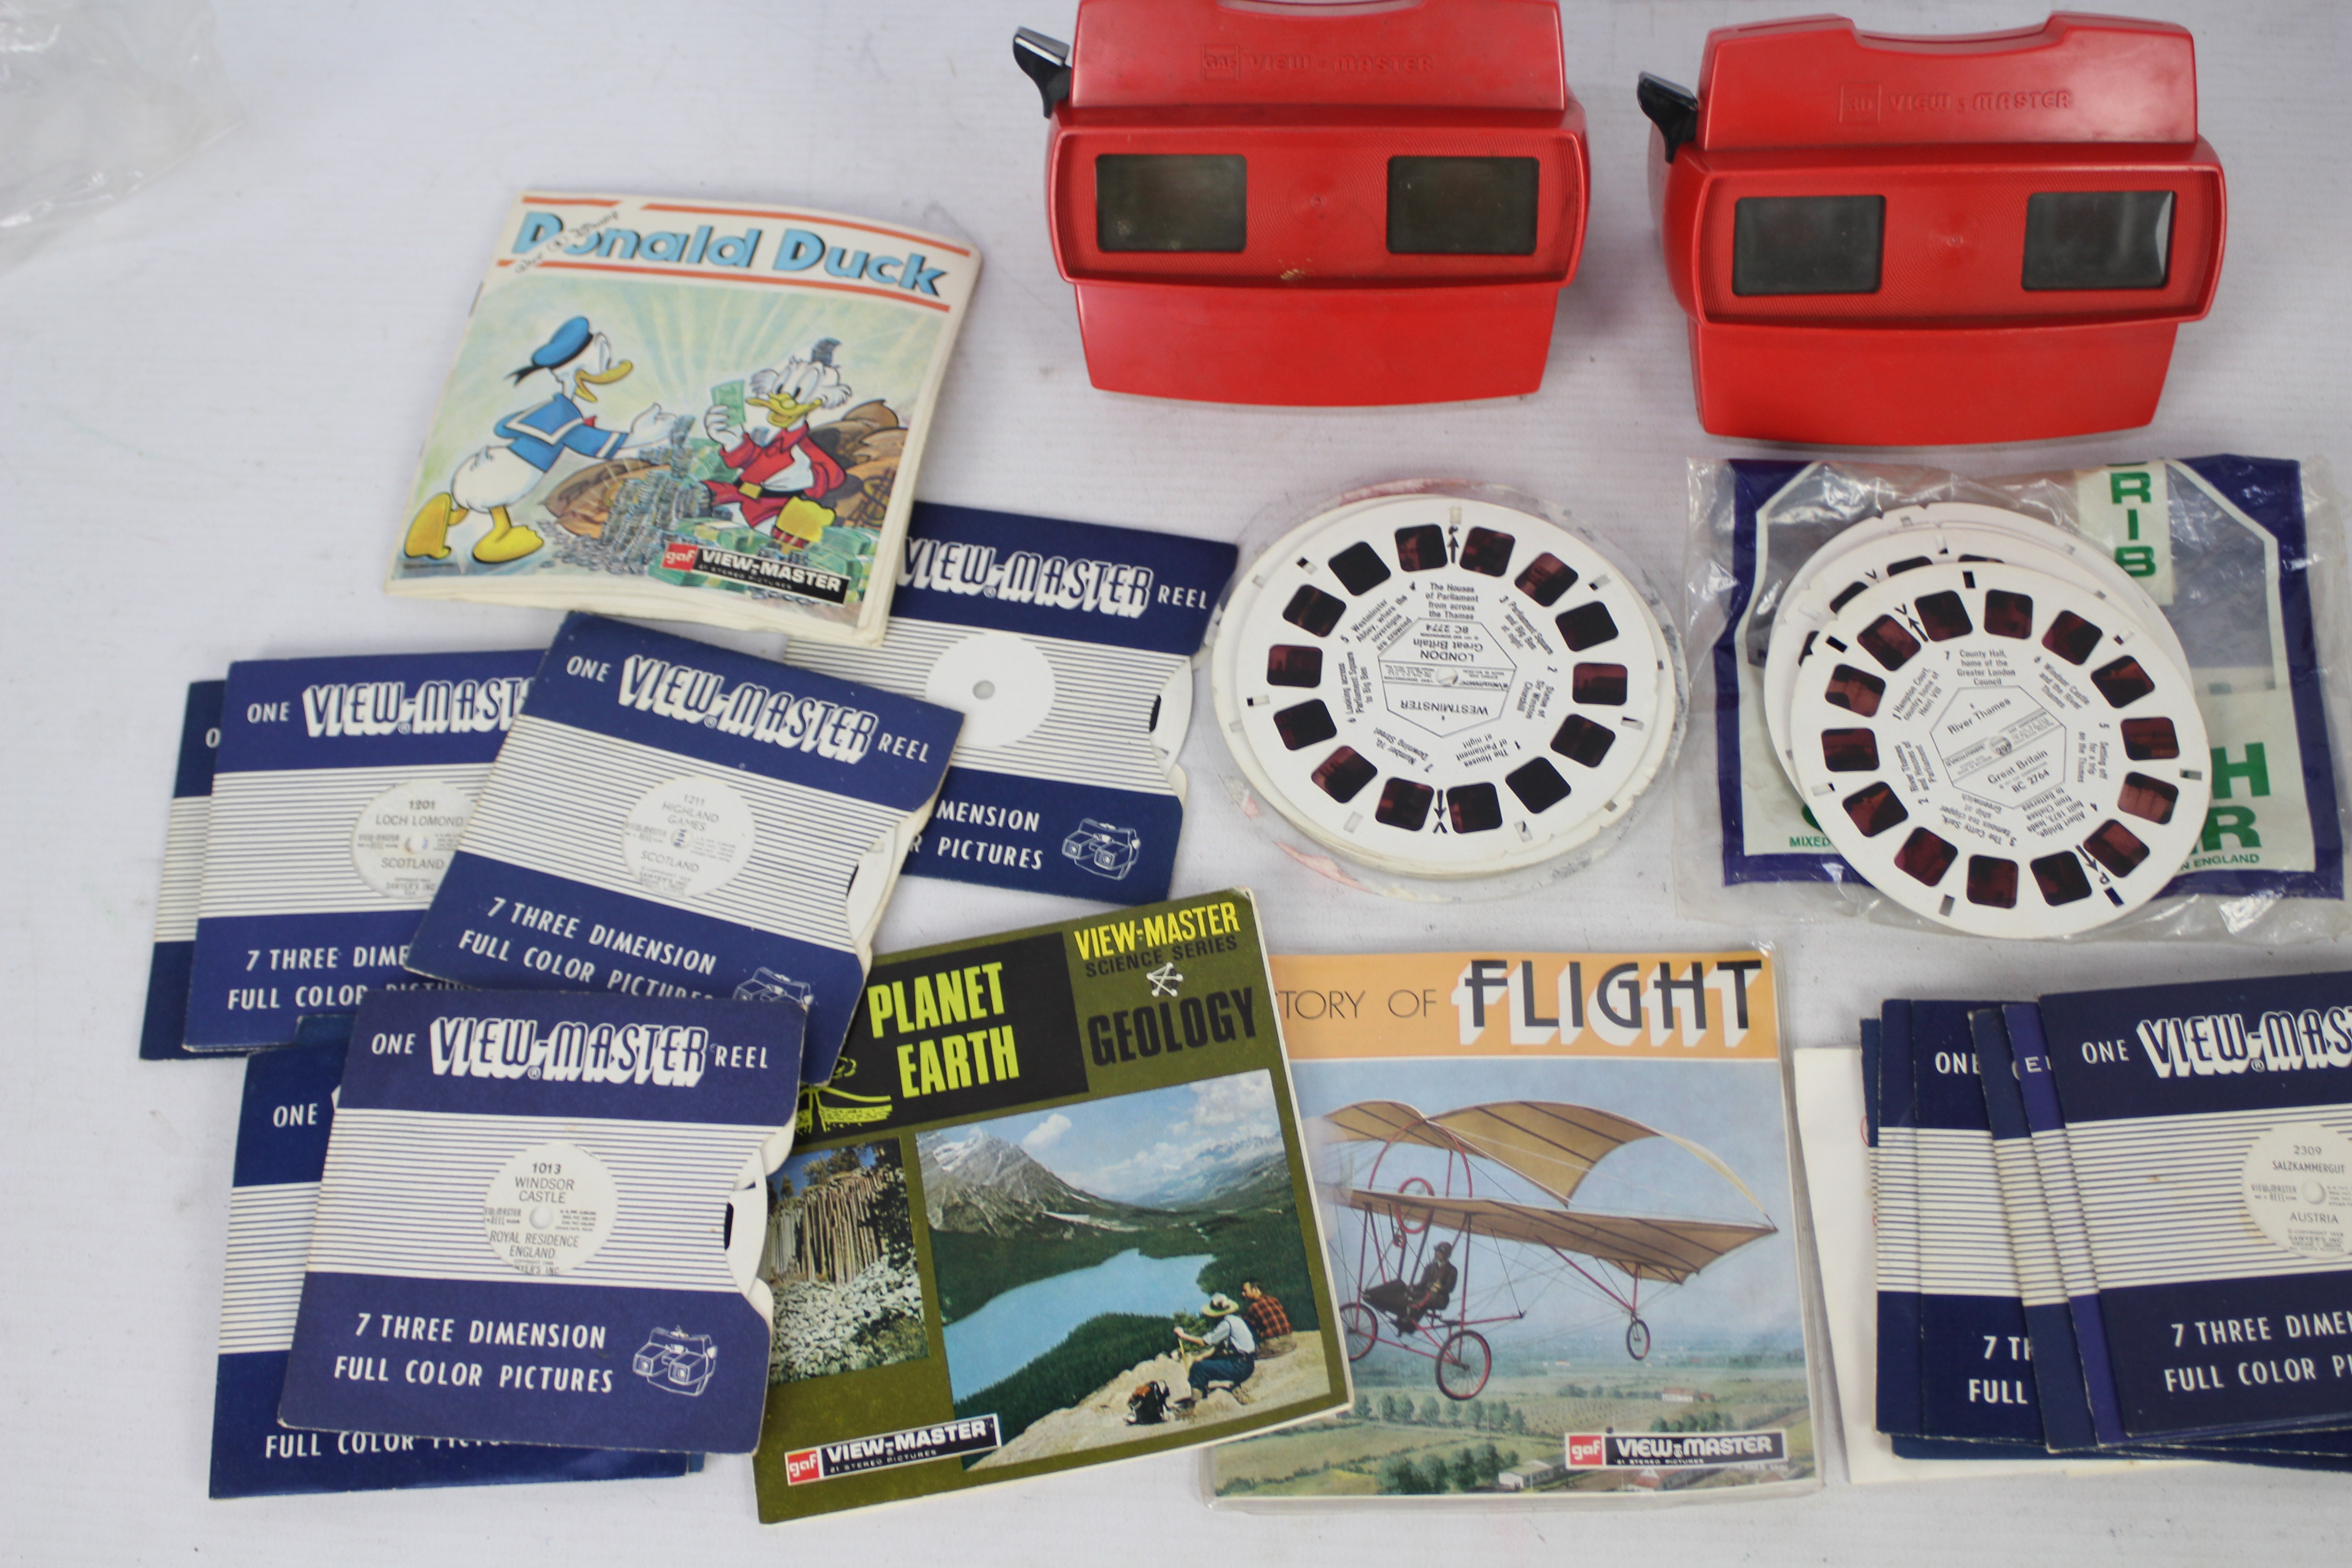 GAF - View Master - 2 x vintage View Masters with over 30 discs including ET, My Little Pony, - Image 3 of 3